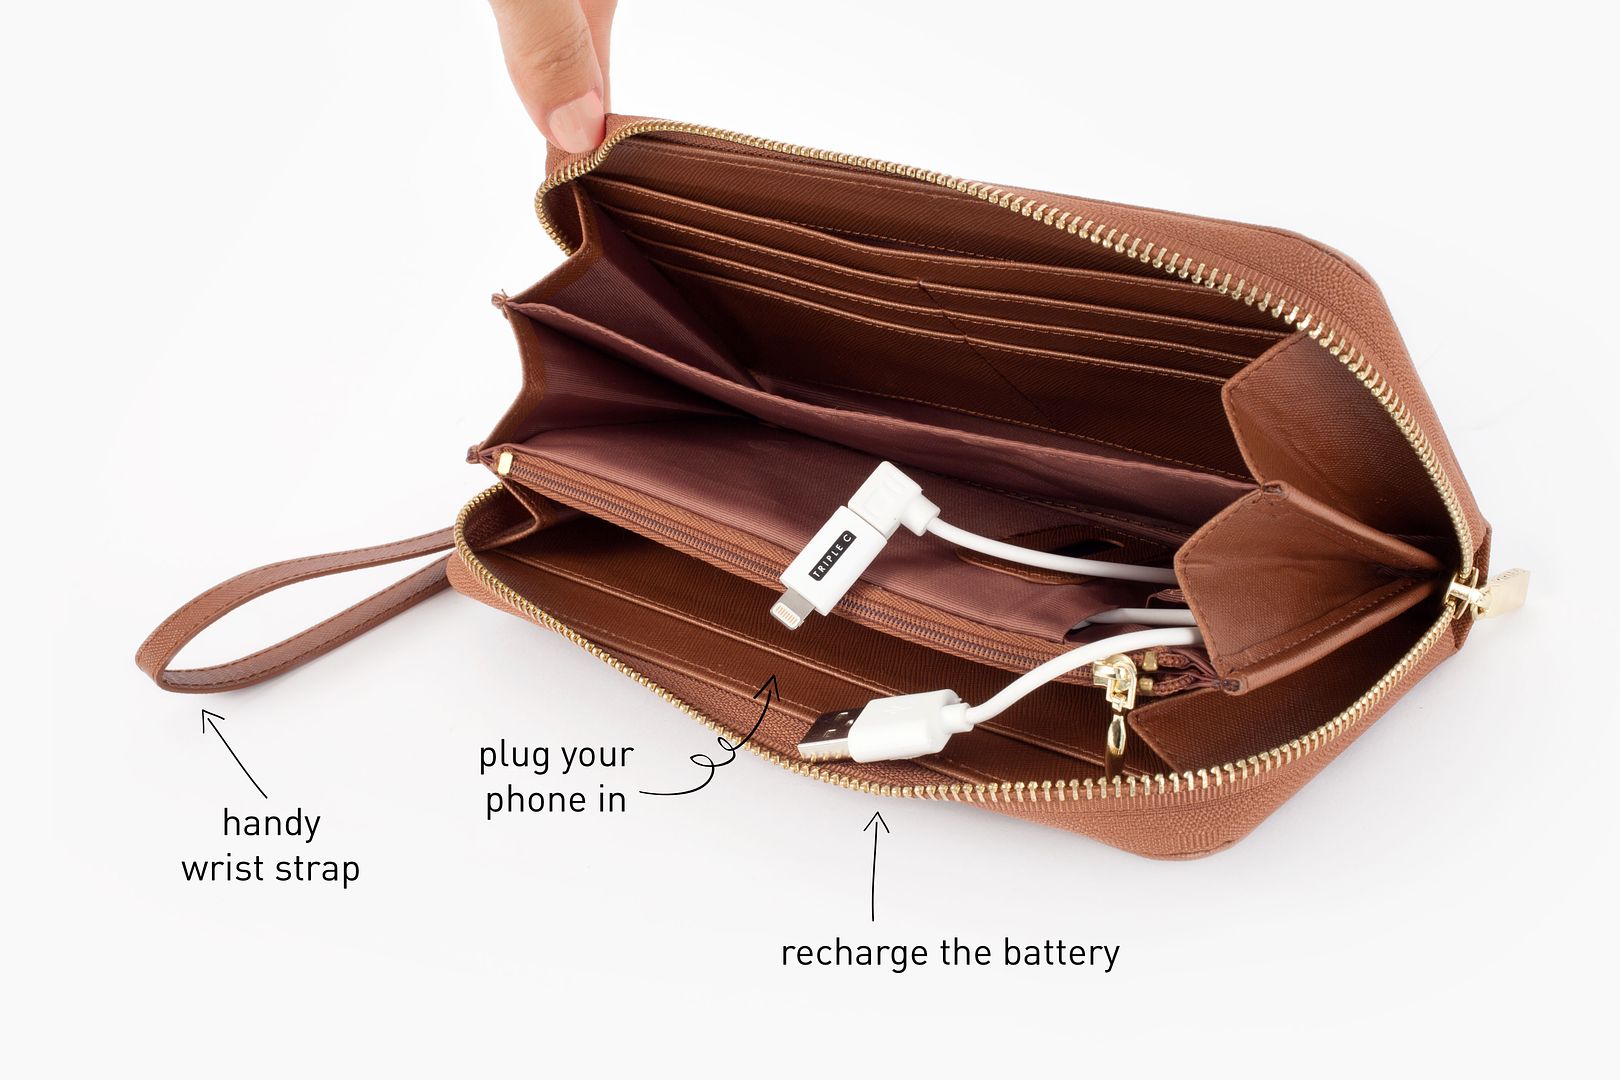 The Power Wallet with a built-in battery pack for your smart phone